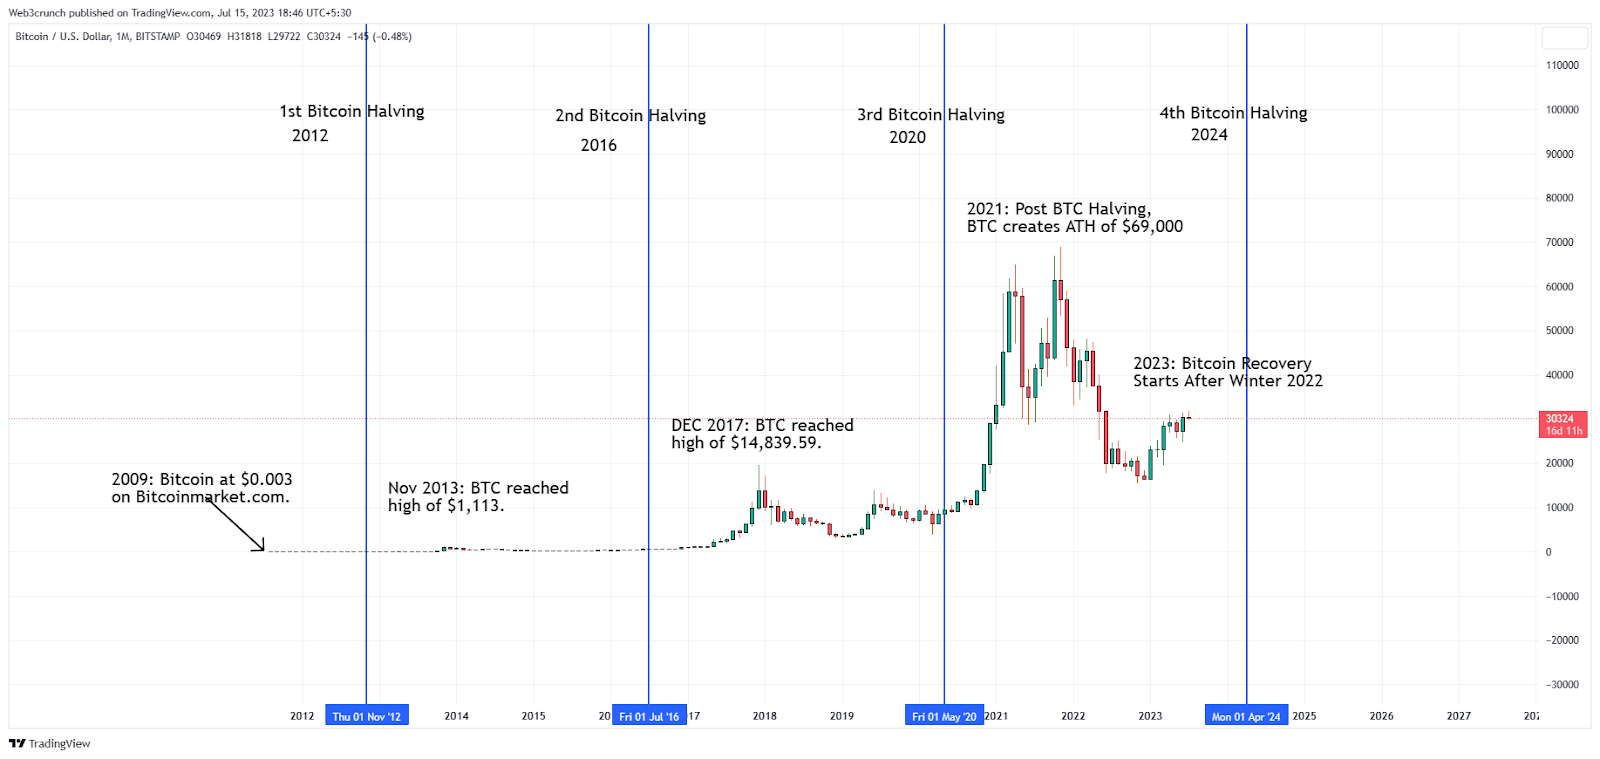 Will the Bitcoin Halving Cause Another BTC Price Hype Cycle?